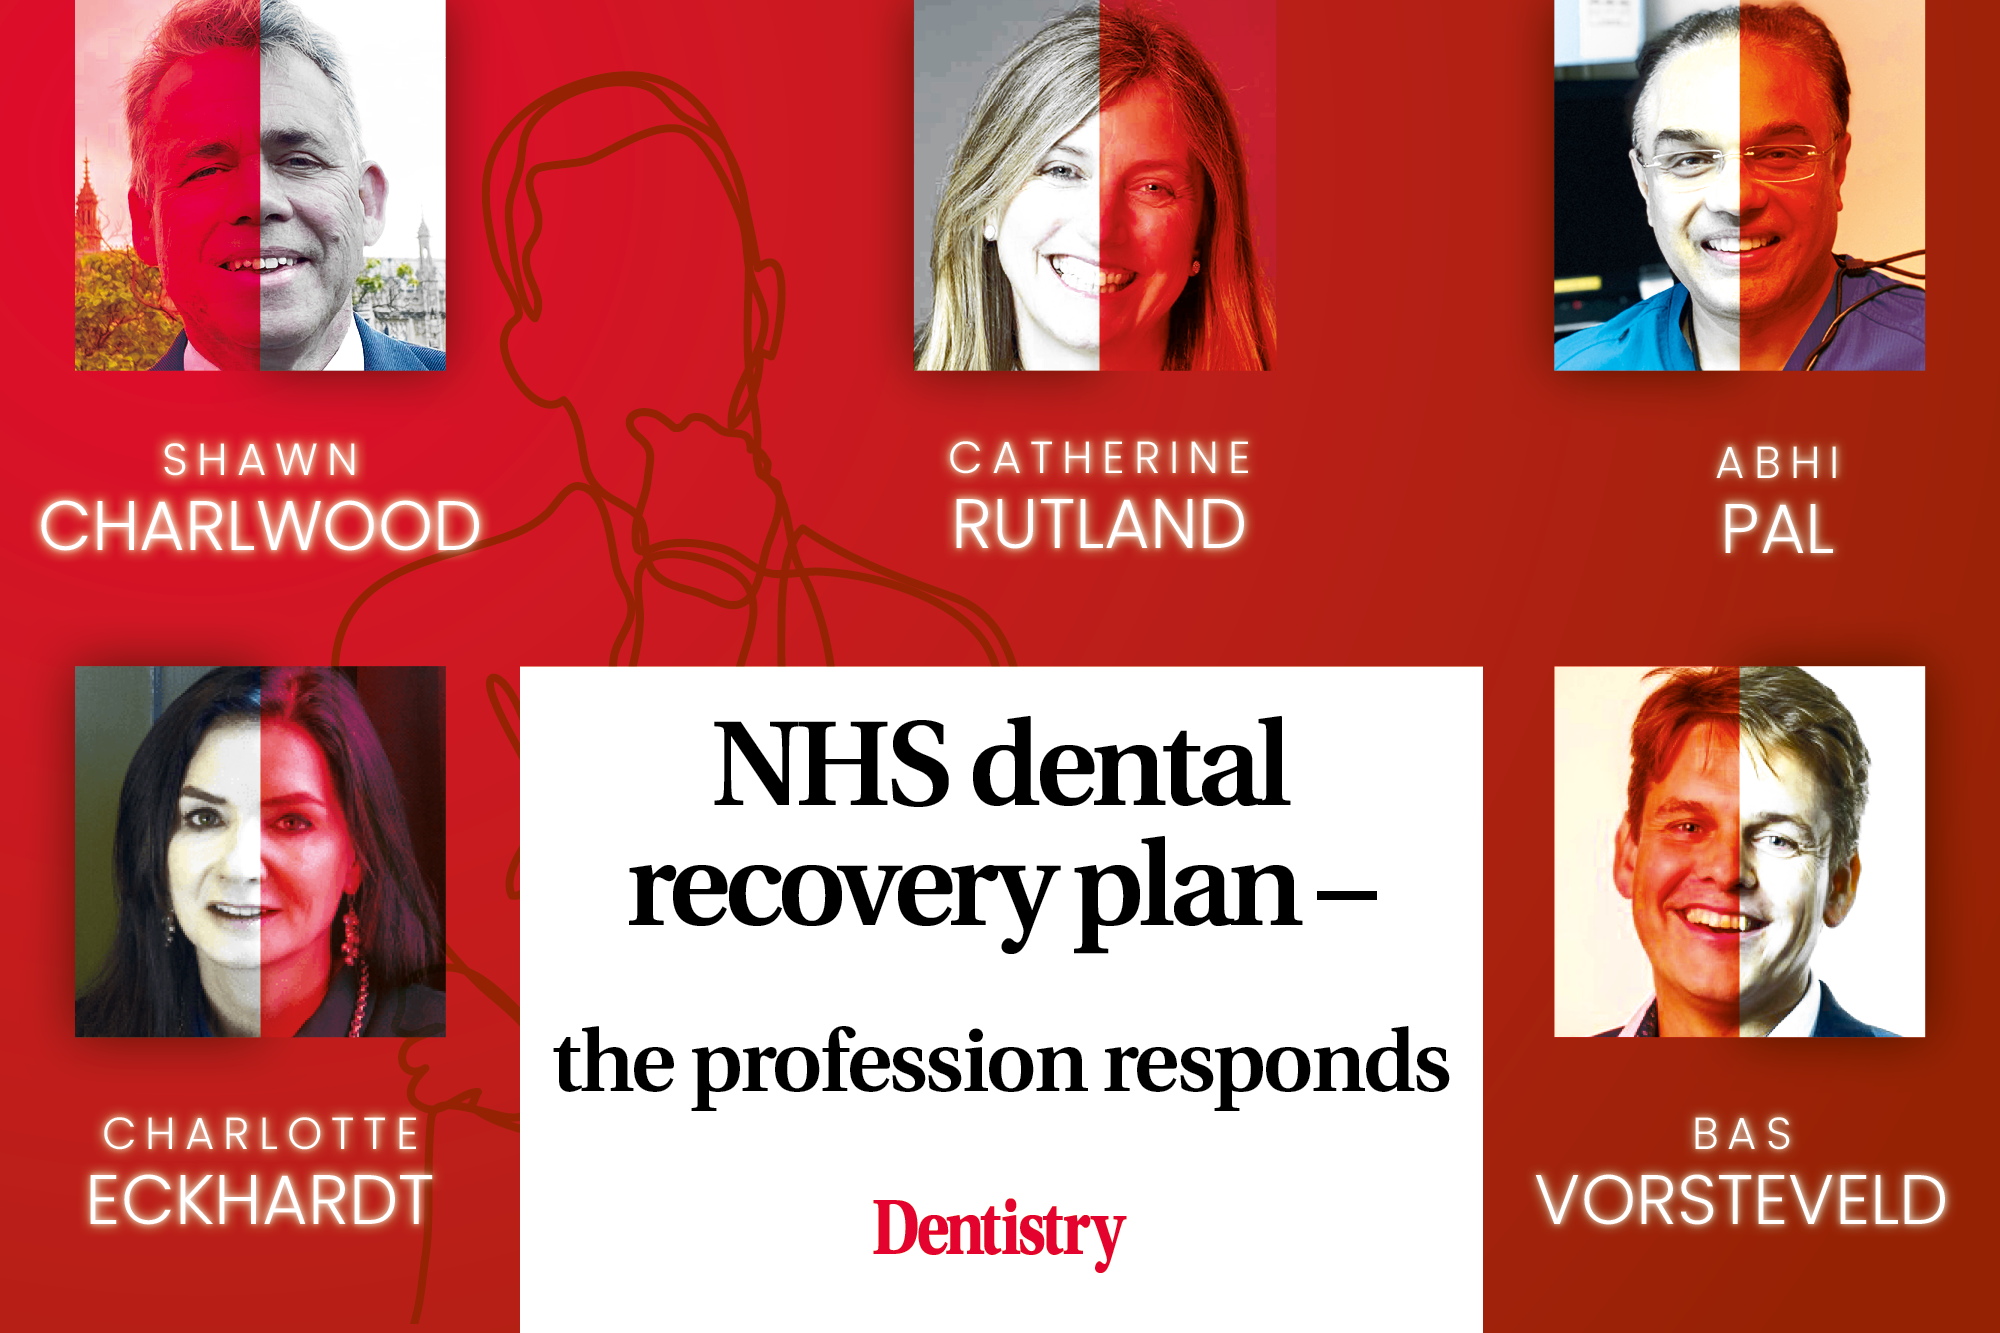 the profession responds to the nhs dental recovery plan